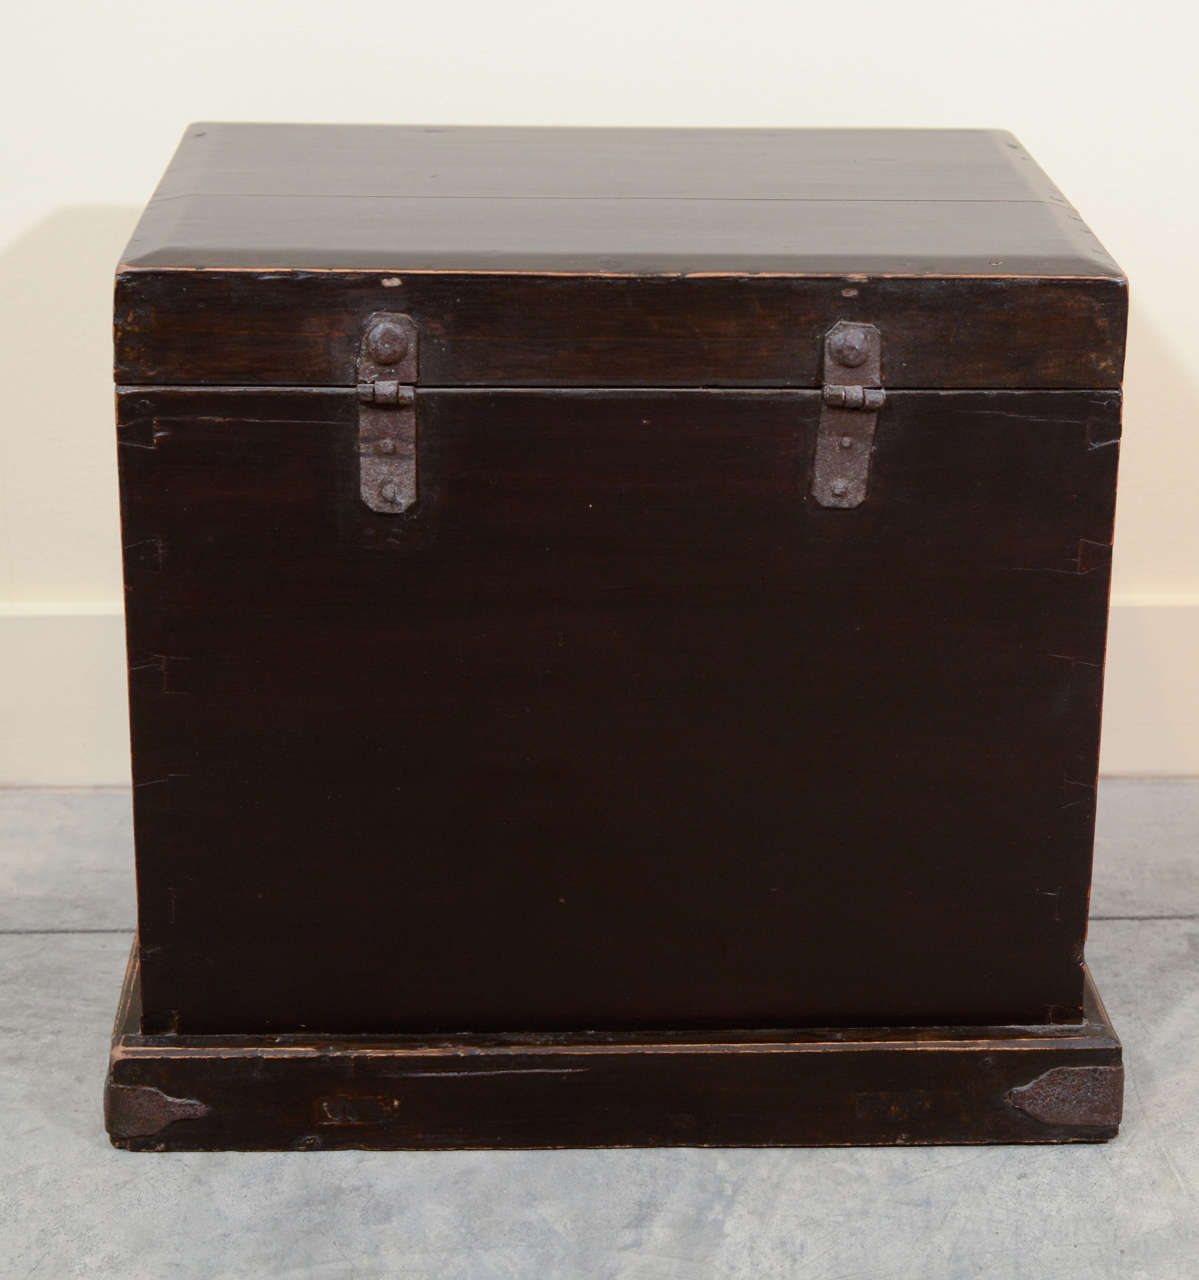 Antique Jewelry Box with Drawers 1